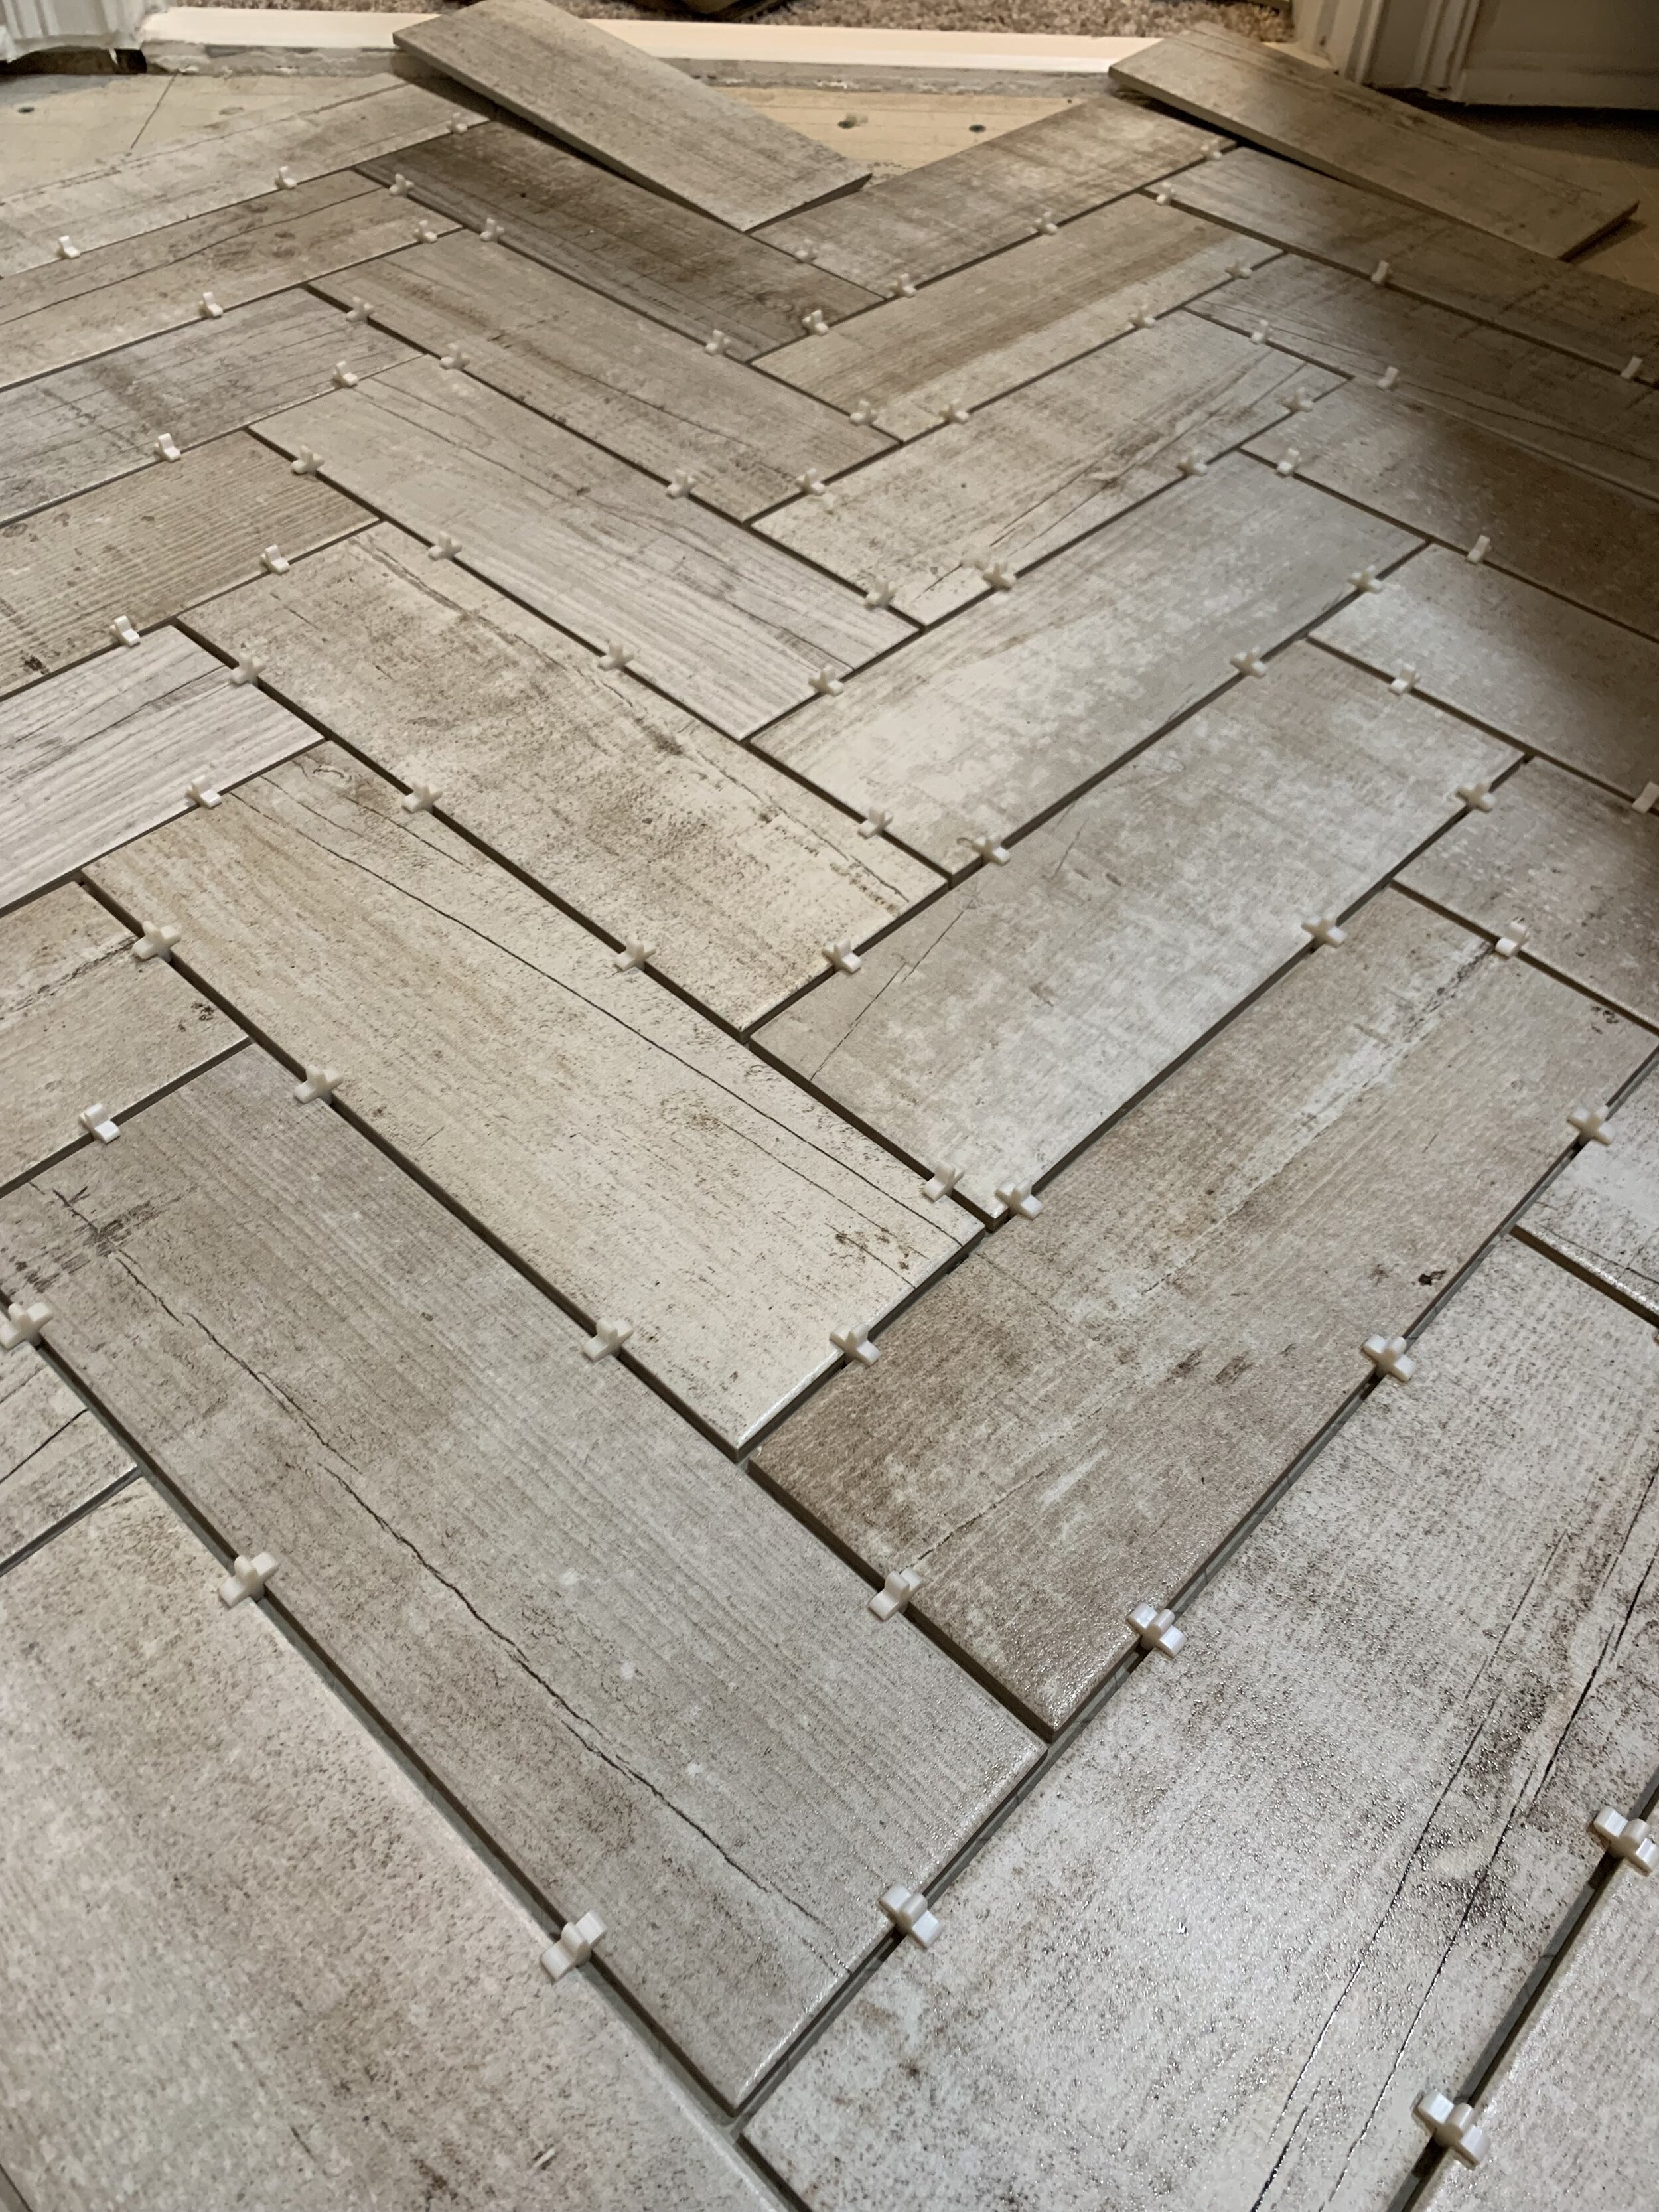 We dry fitting the tile first to practice the herringbone pattern and to see where we wanted to start the tile.